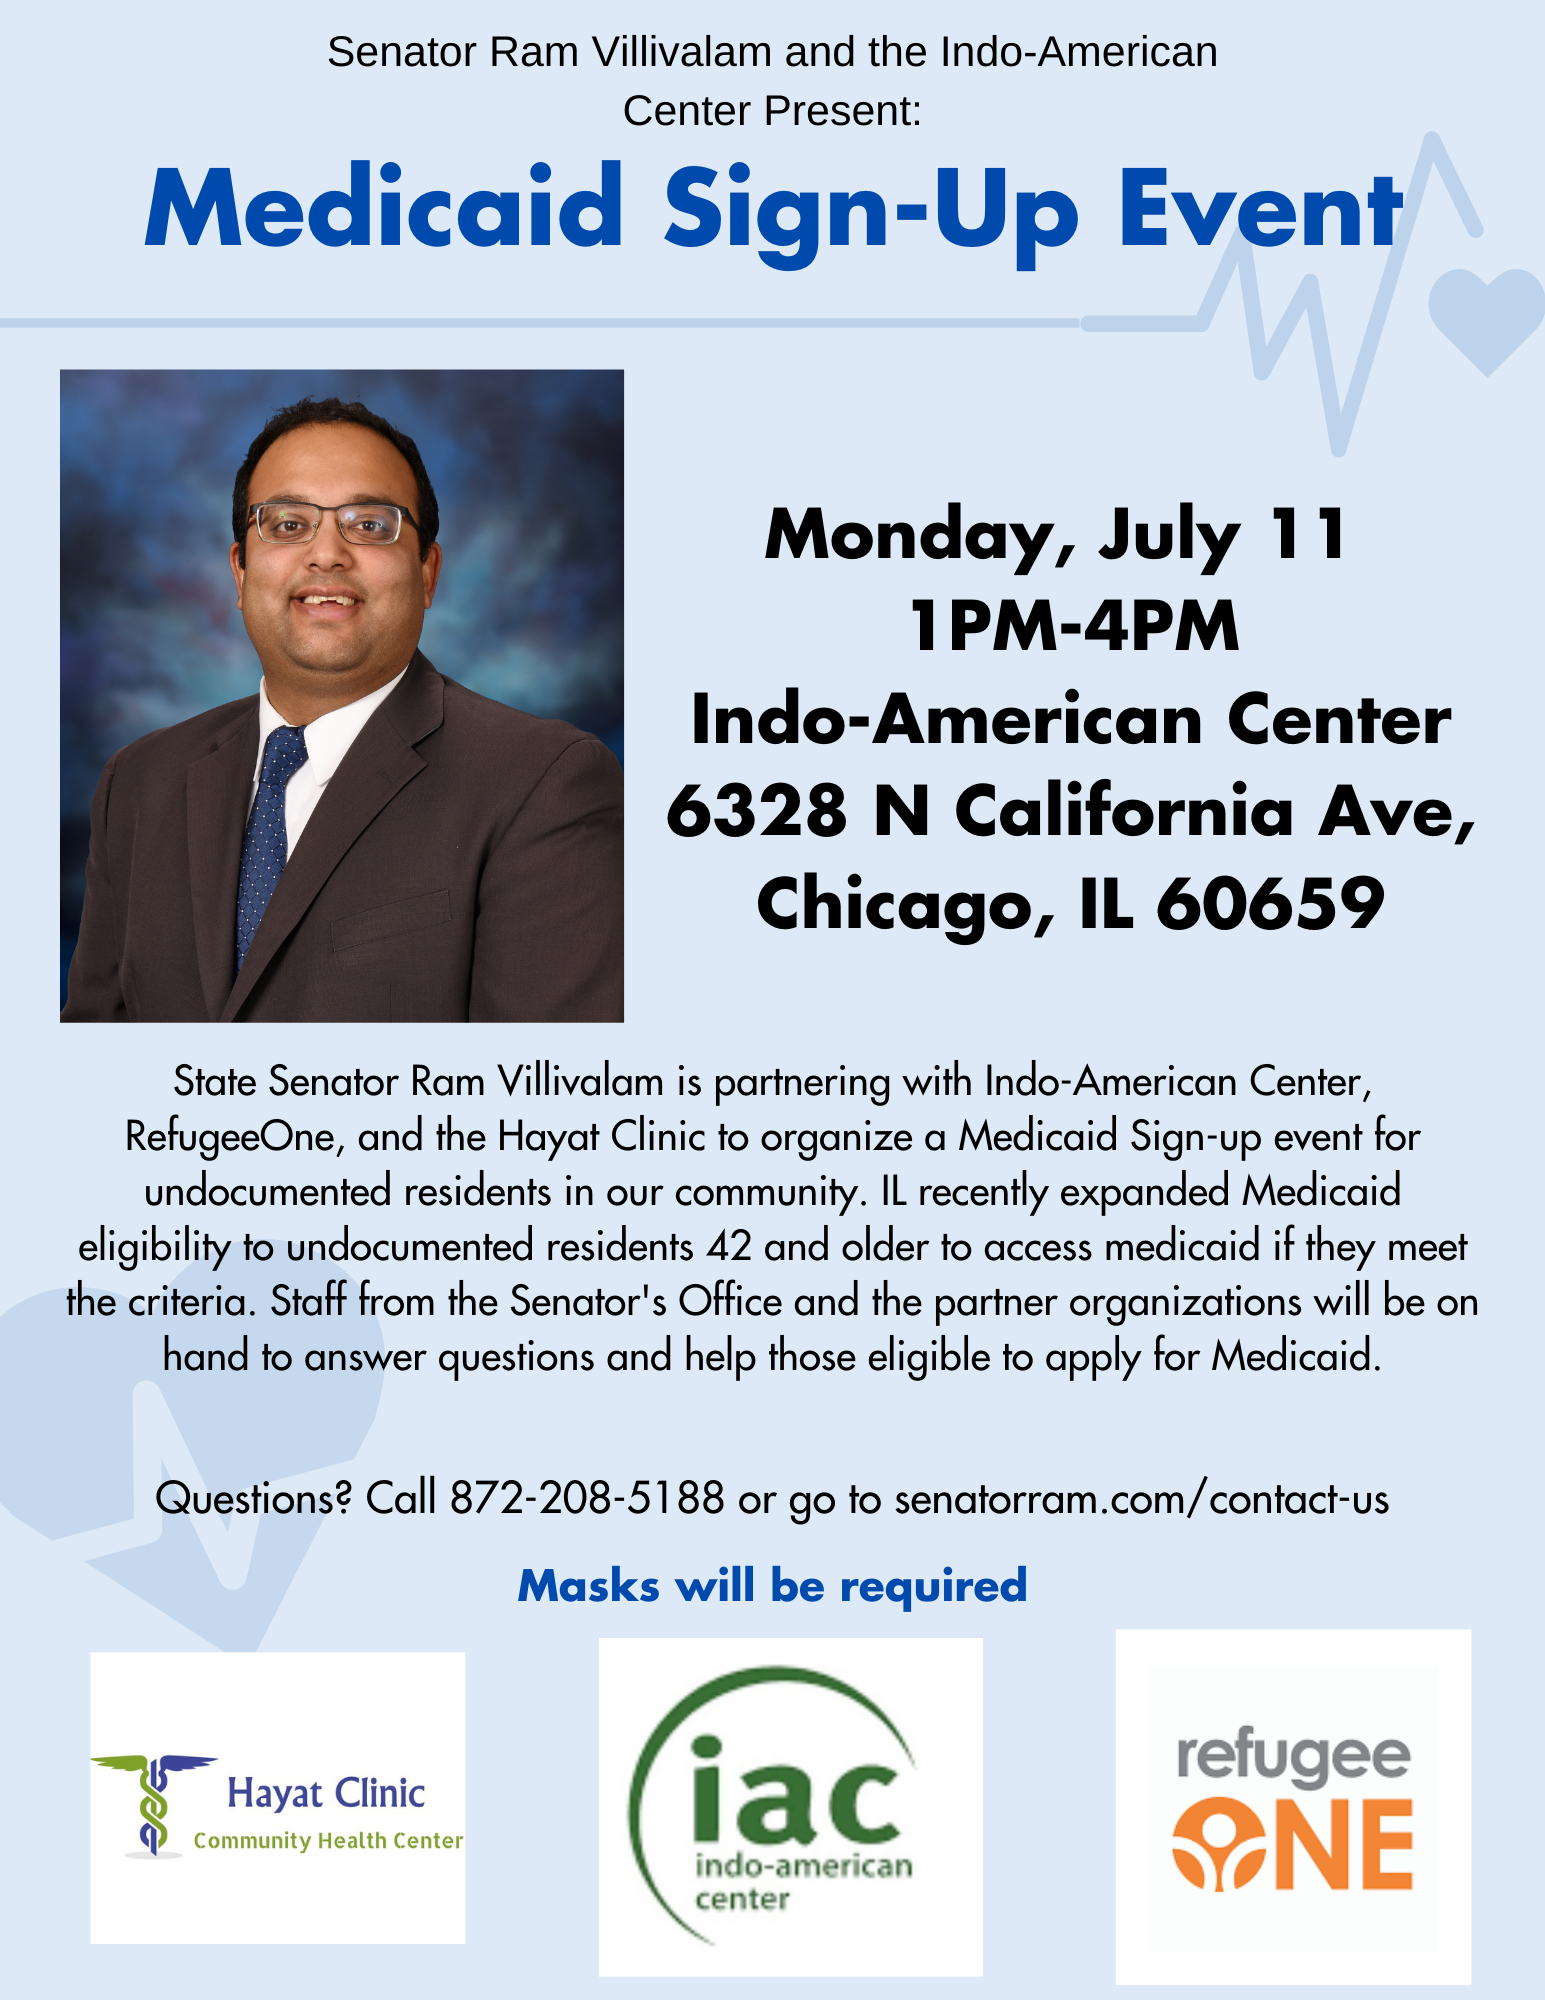 Medicaid sign up event